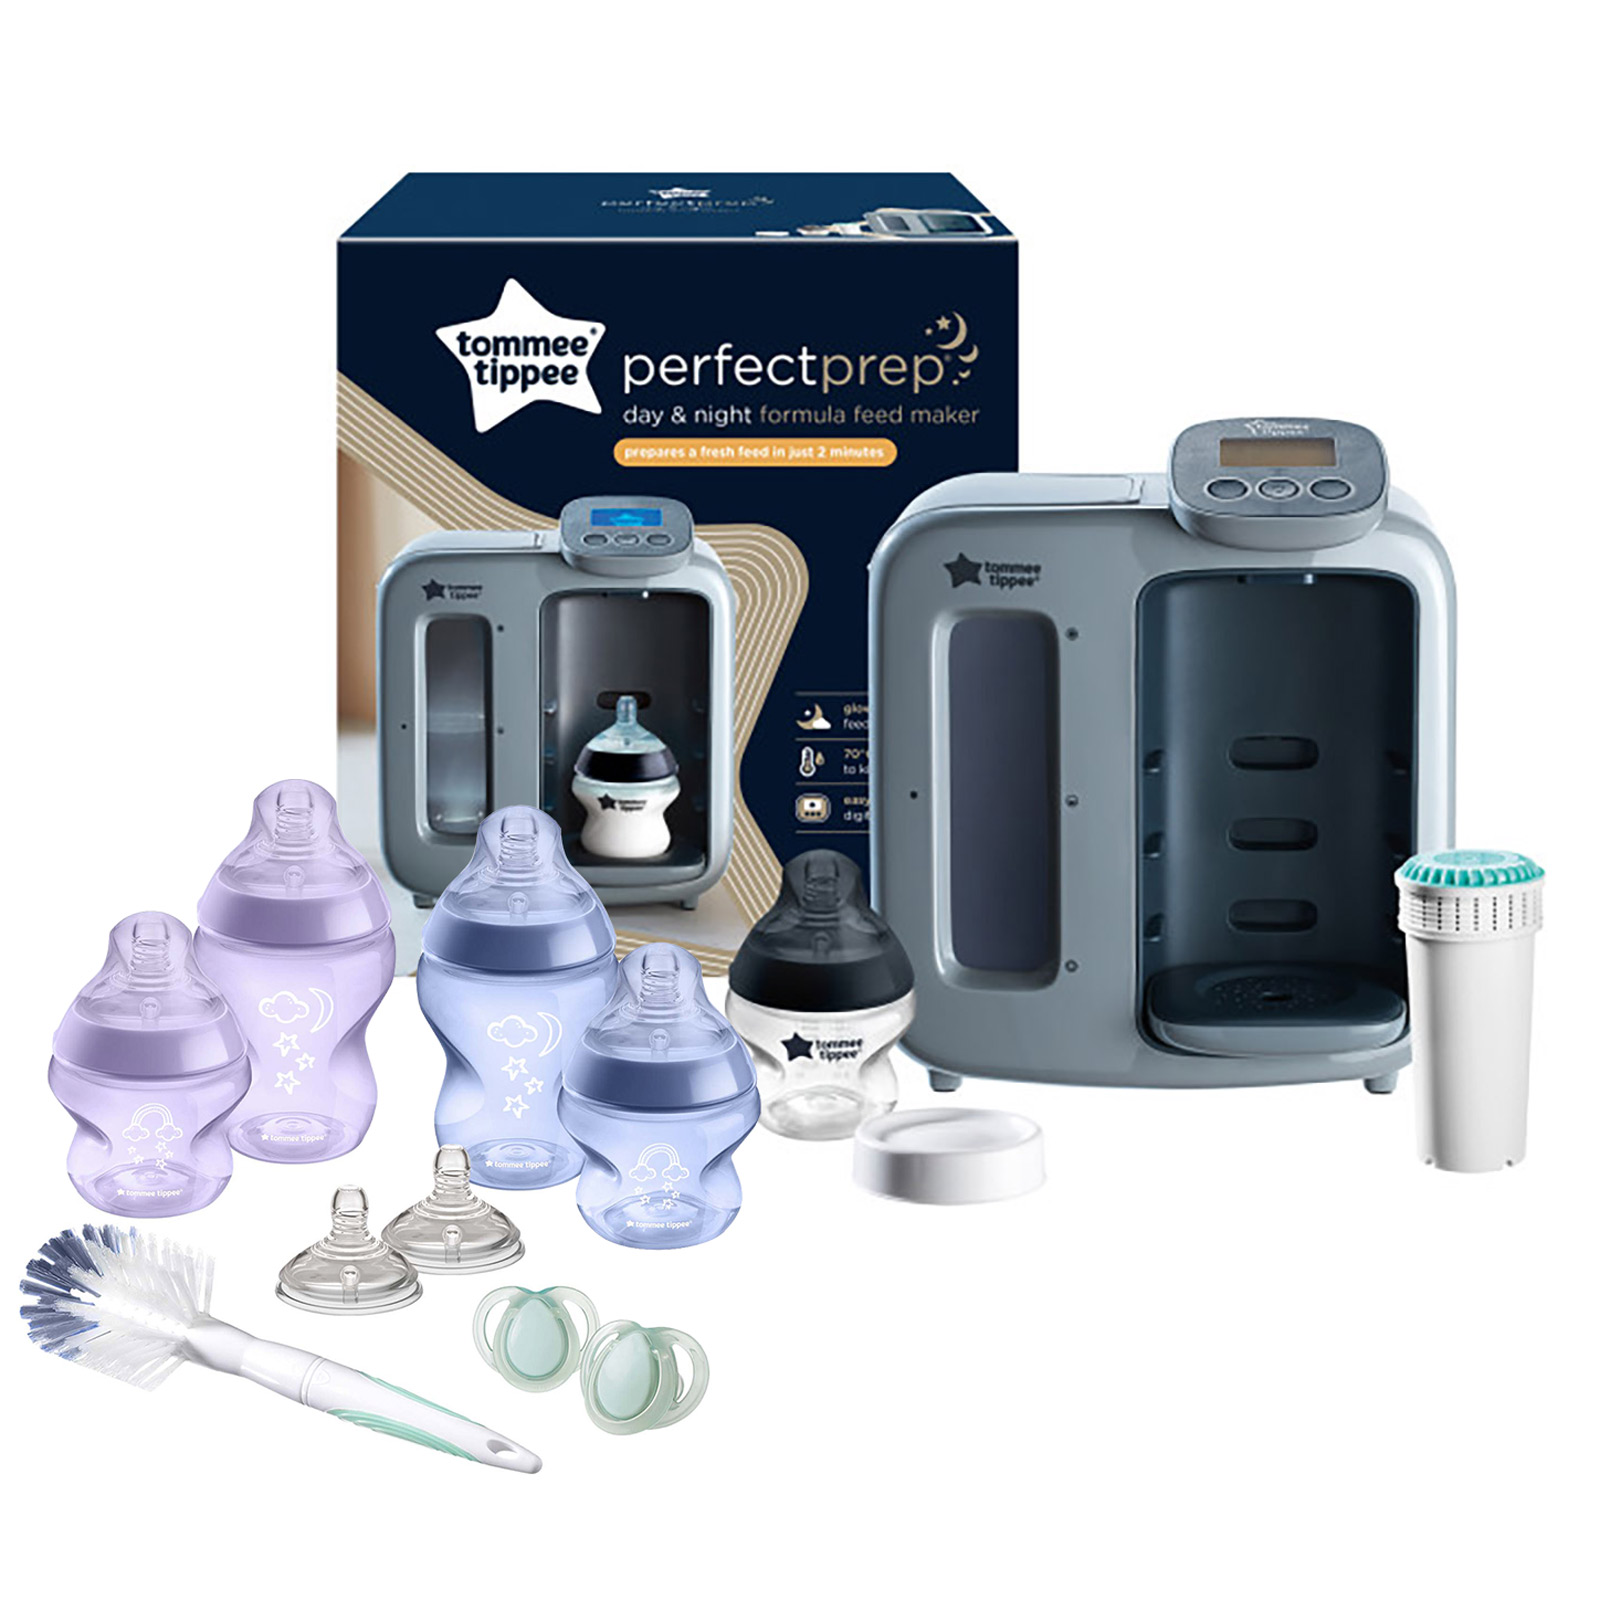 Tommee Tippee Perfect Prep Day & Night Machine Instant Baby Bottle Maker With Baby Bottle Set - Grey/Purple/Blue